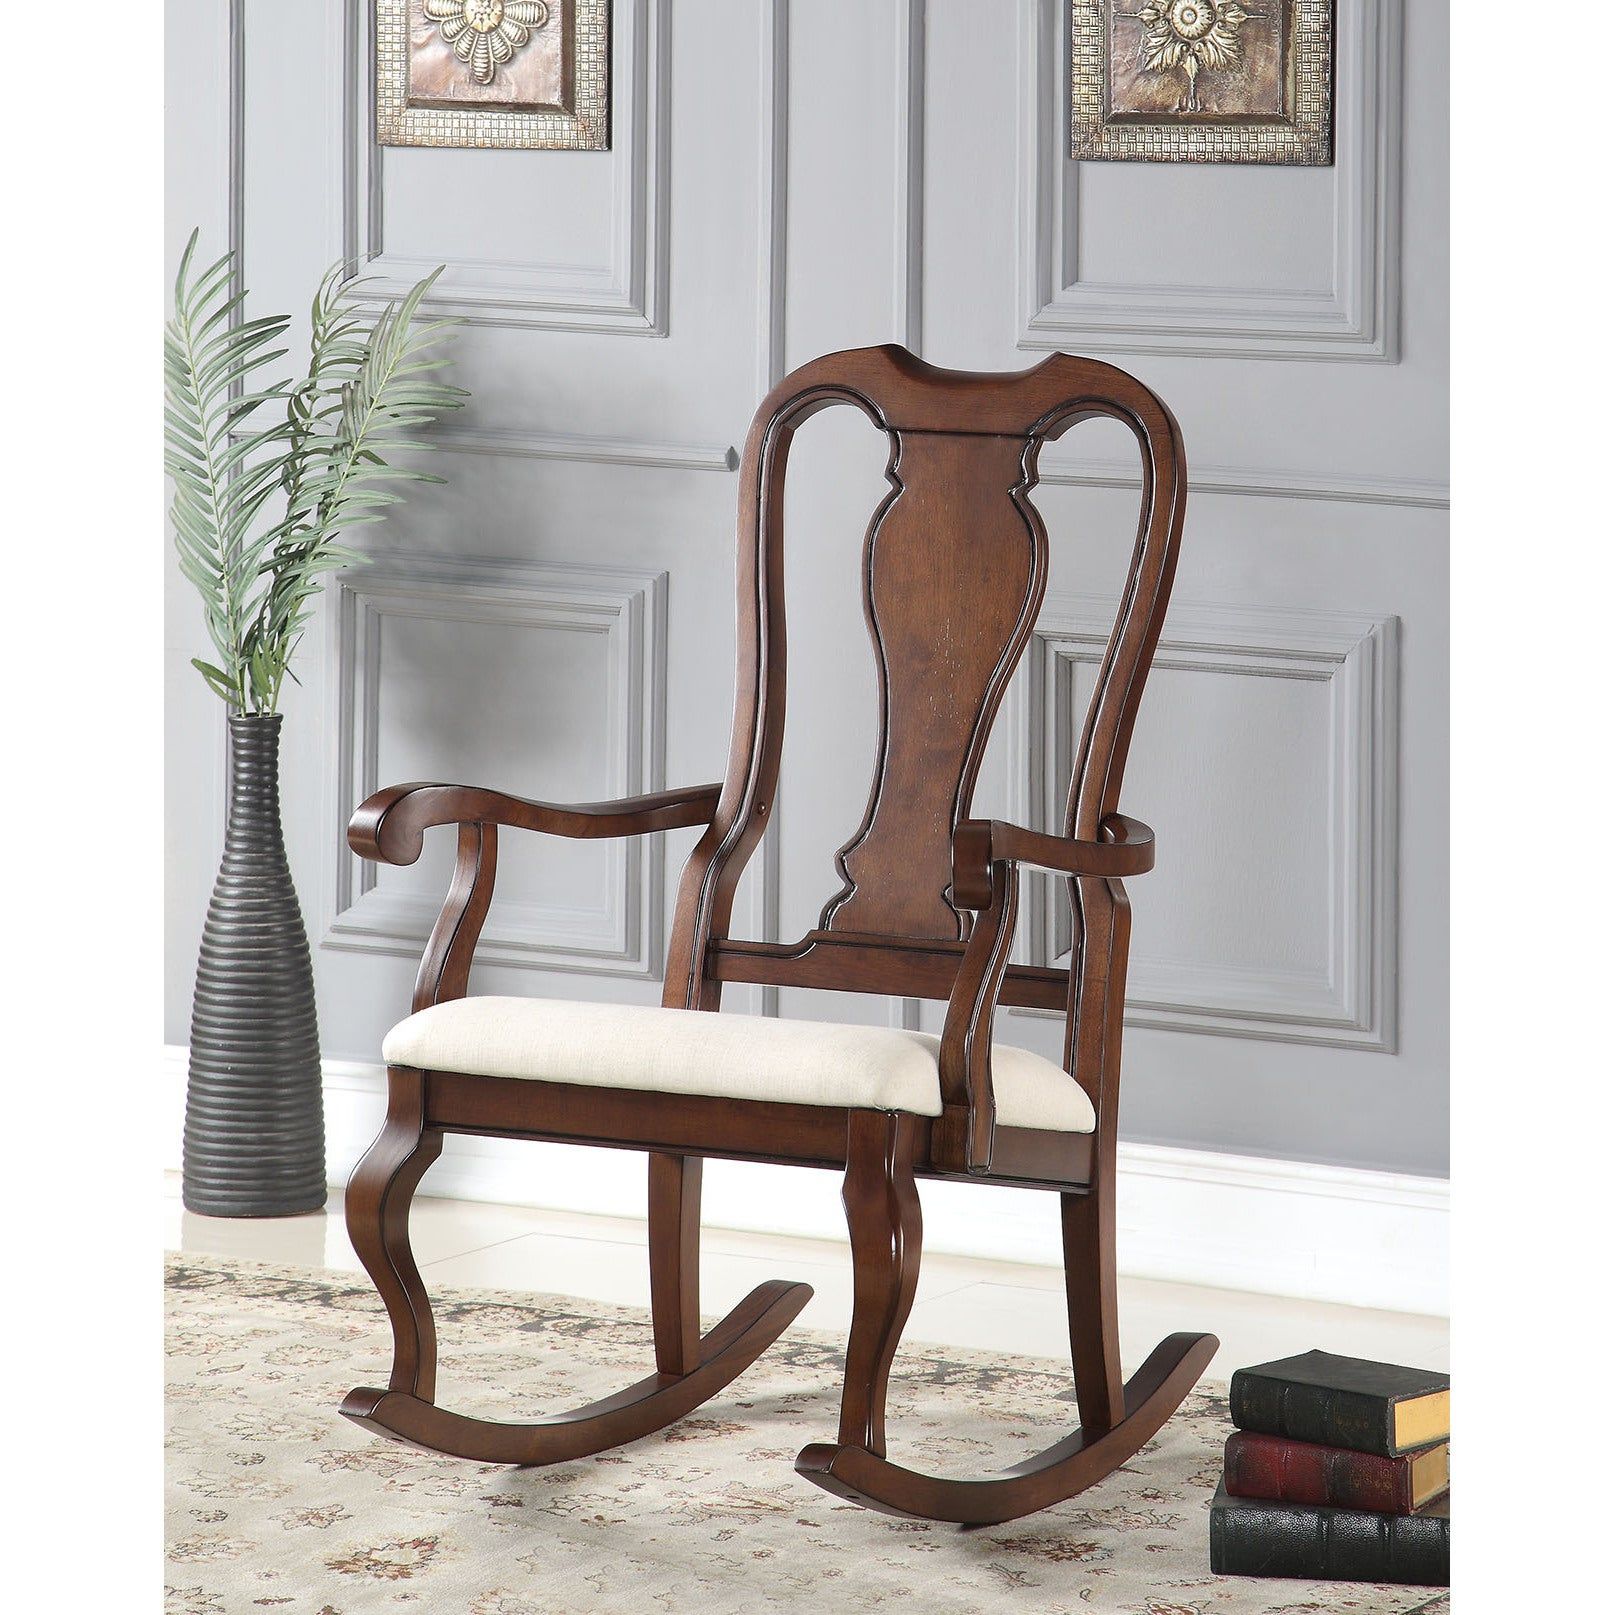 Buy Rocking Chairs, Traditional Living Room Chairs Online At In Judson Traditional Rocking Chairs (Photo 8 of 20)